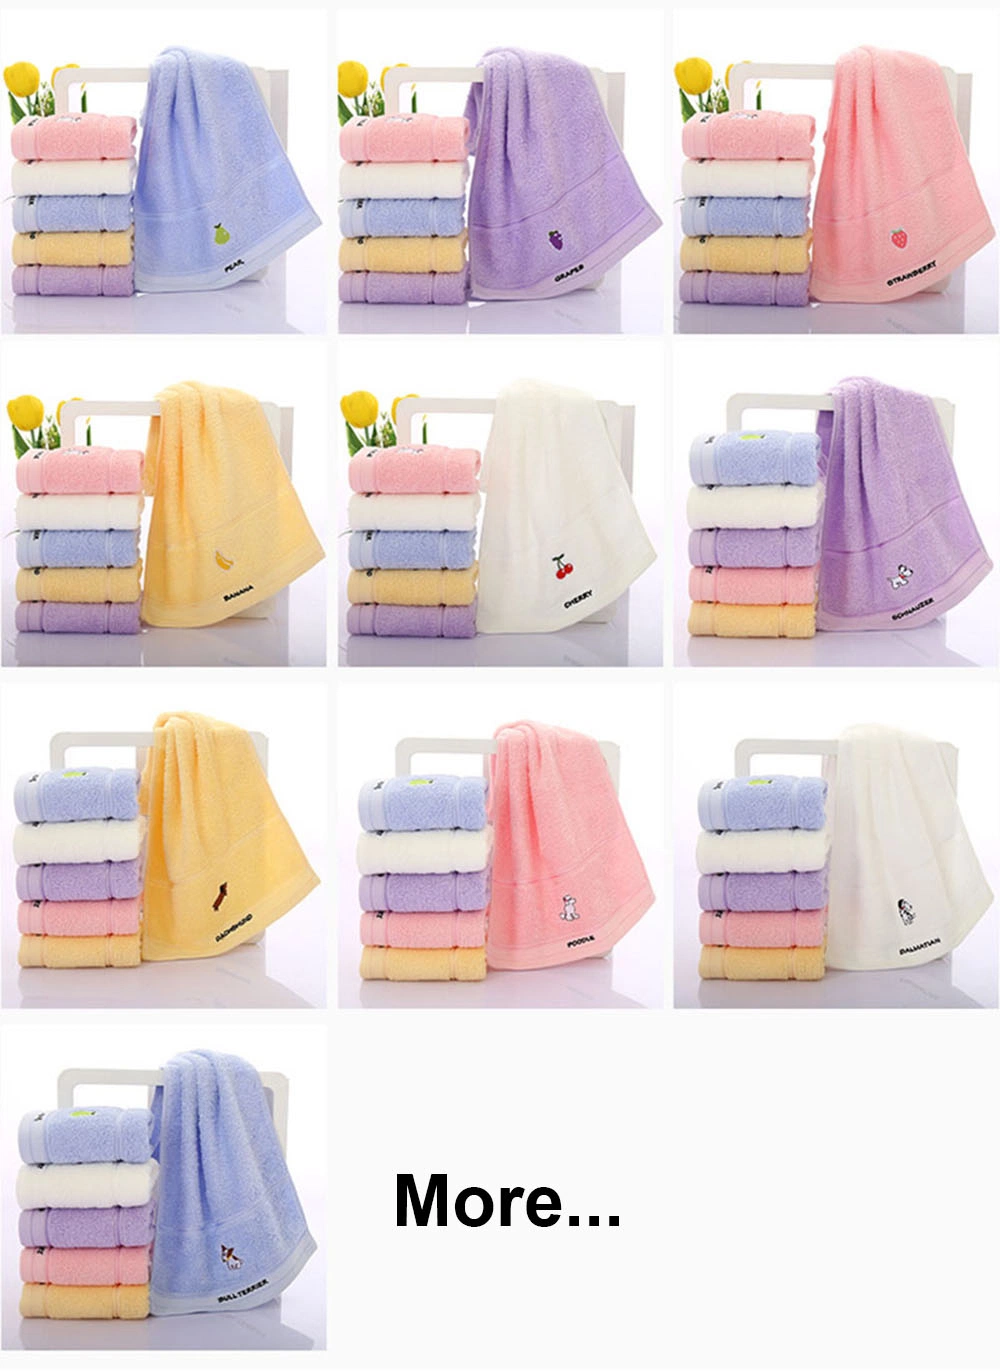 China Factory Wholesale Soft Warm Fluffy Cotton Baby Child Size Towel for Children